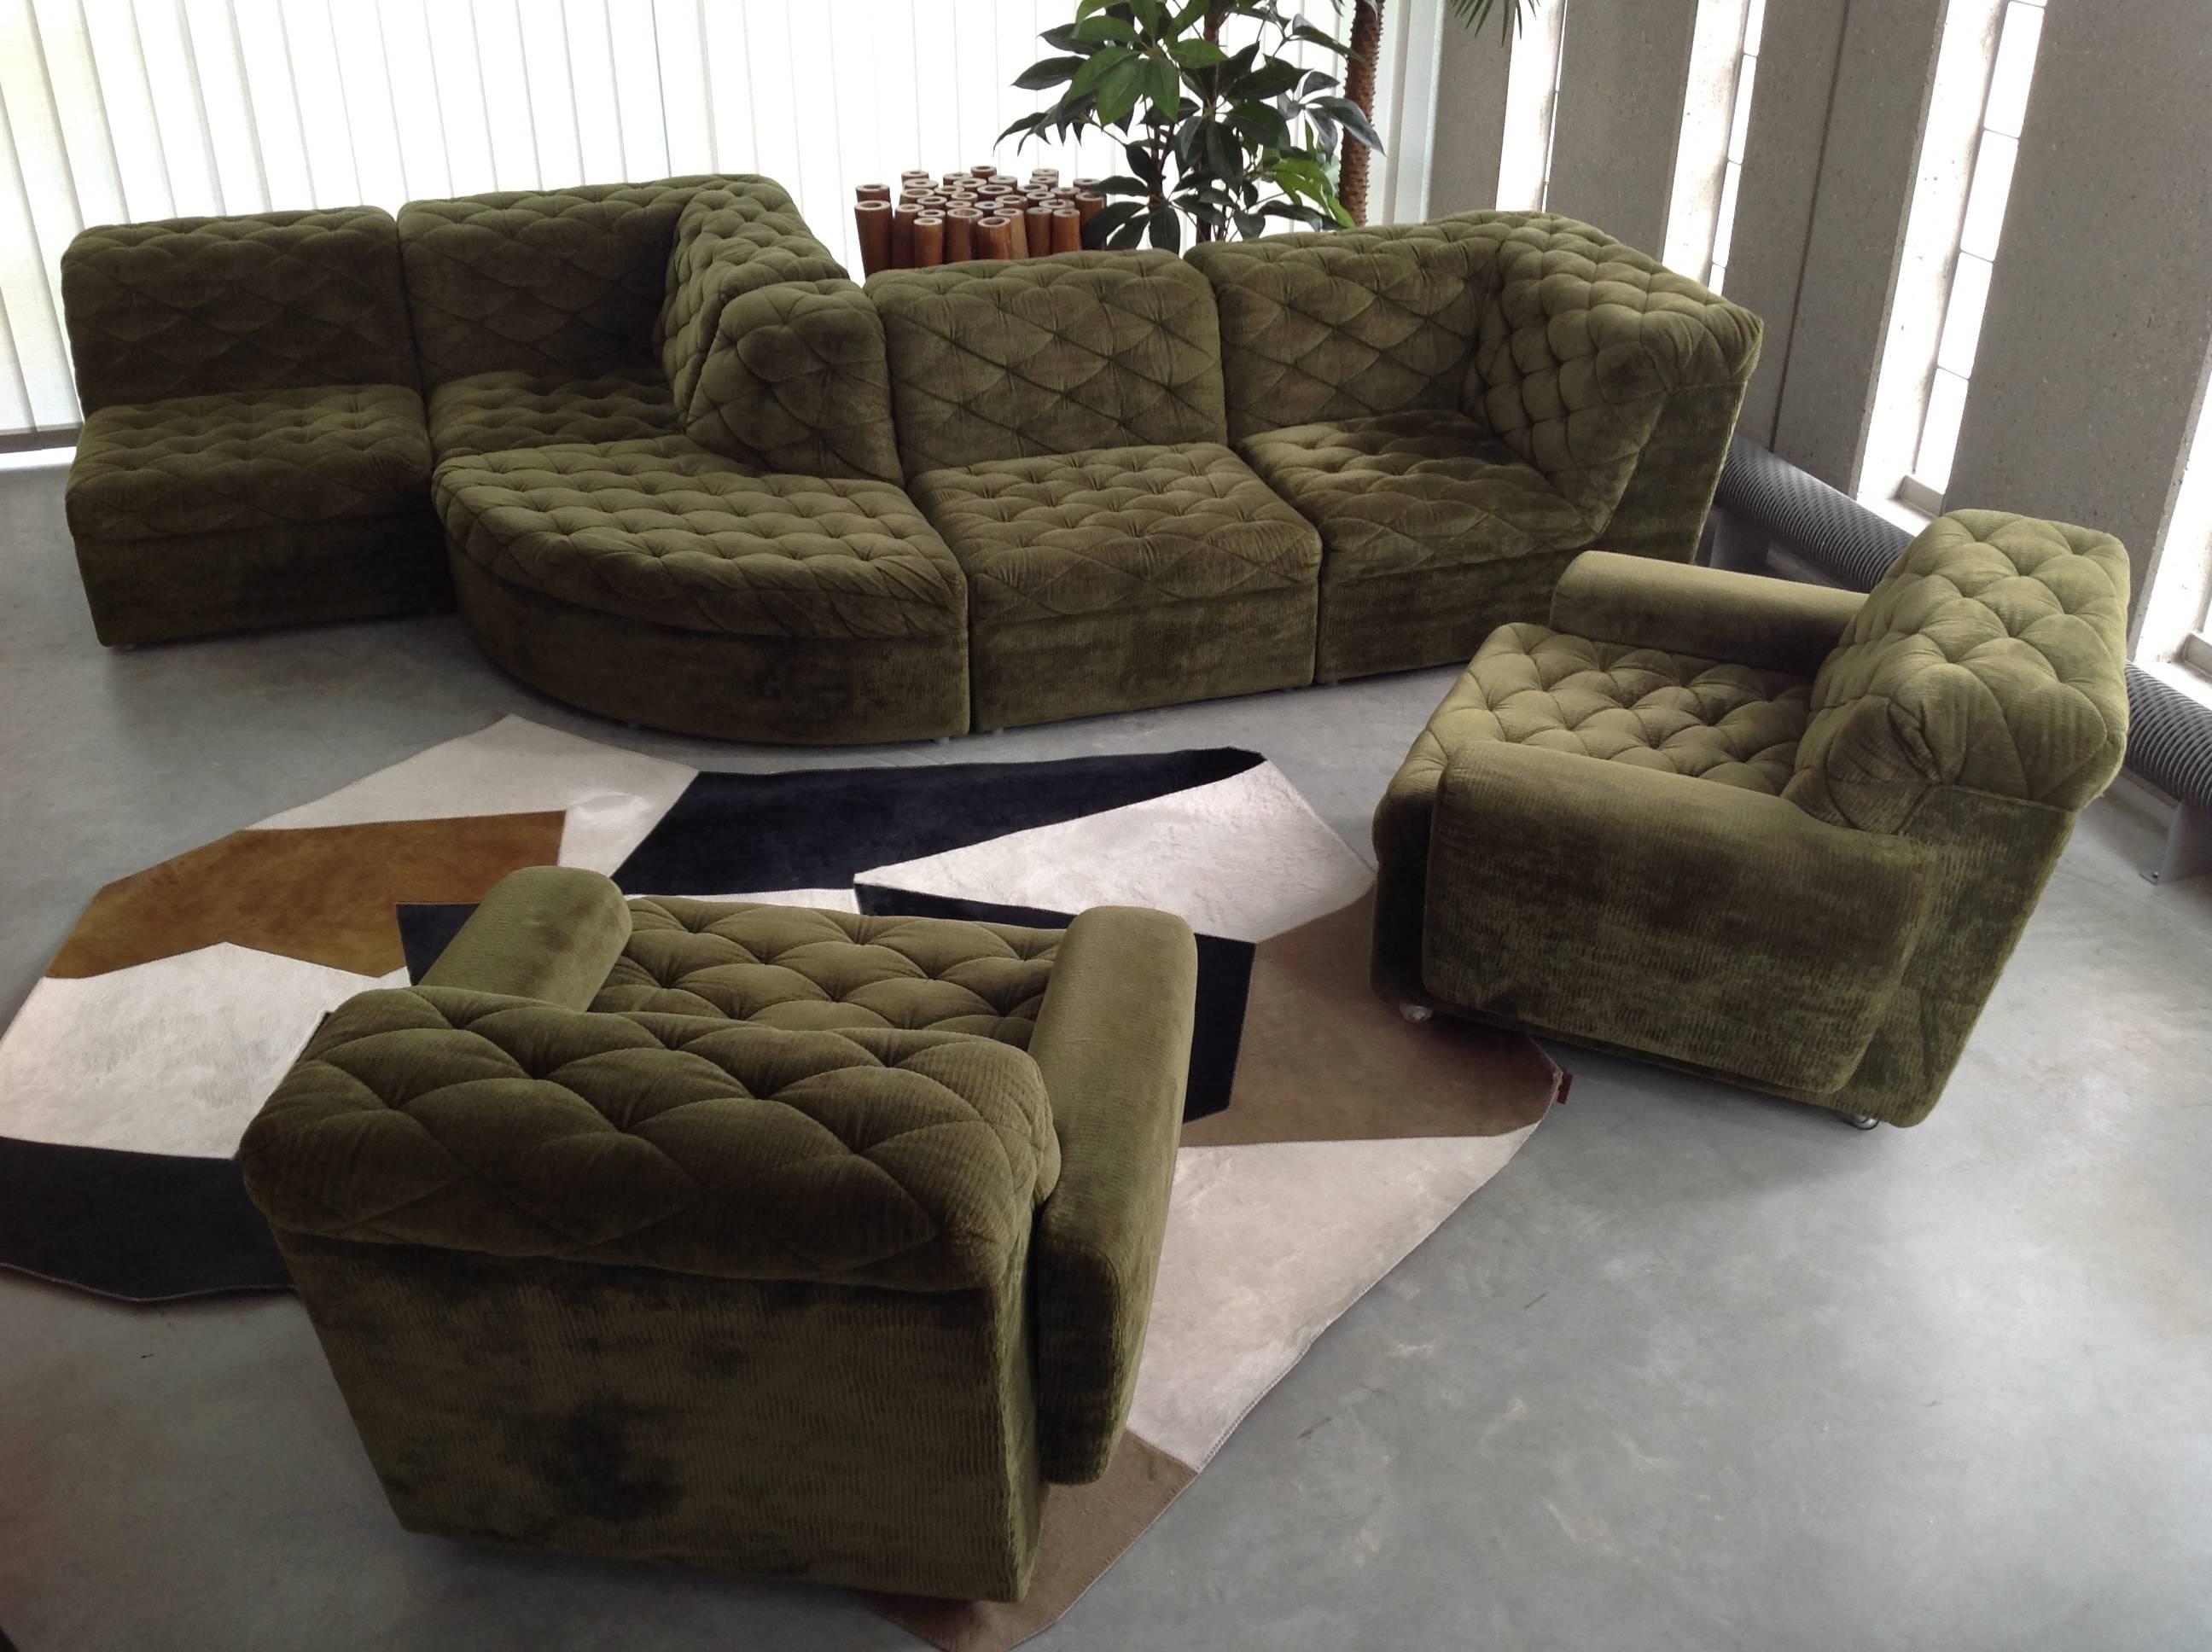 Modular Sofa with Snake Pattern in Beautiful Grass Green Velvet, Top Condition 2